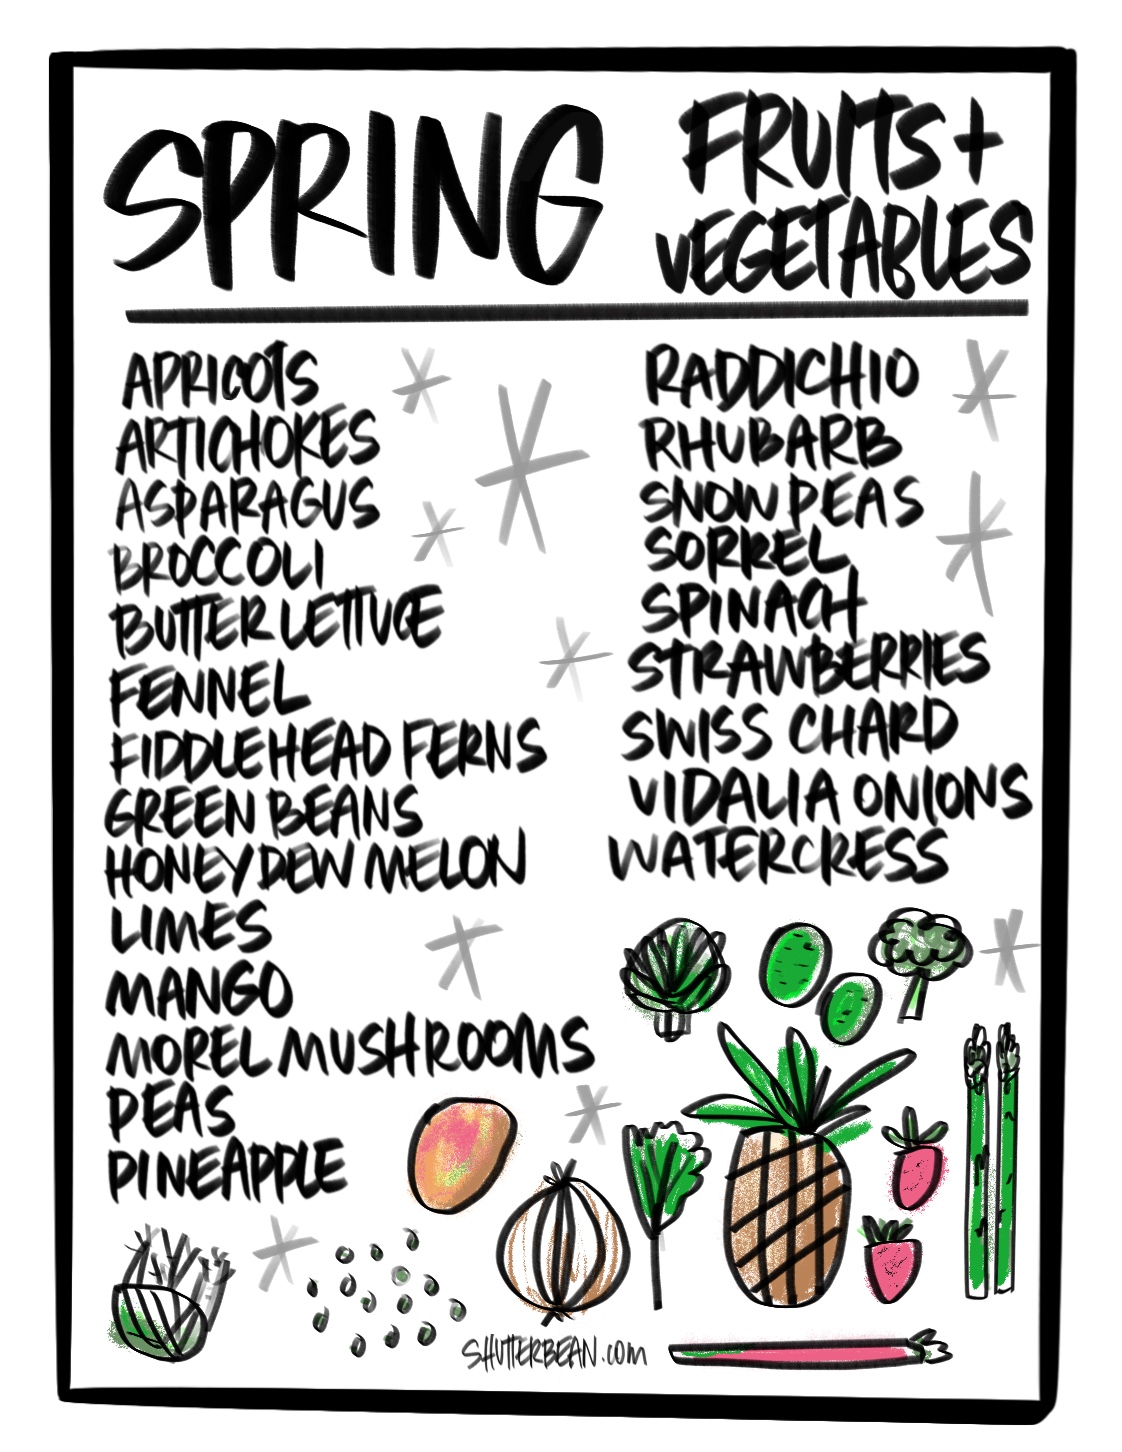 Spring Fruits & Vegetable Recipes- Tracy Benjamin of Shutterbean.com shares her favorite recipes for the Spring!